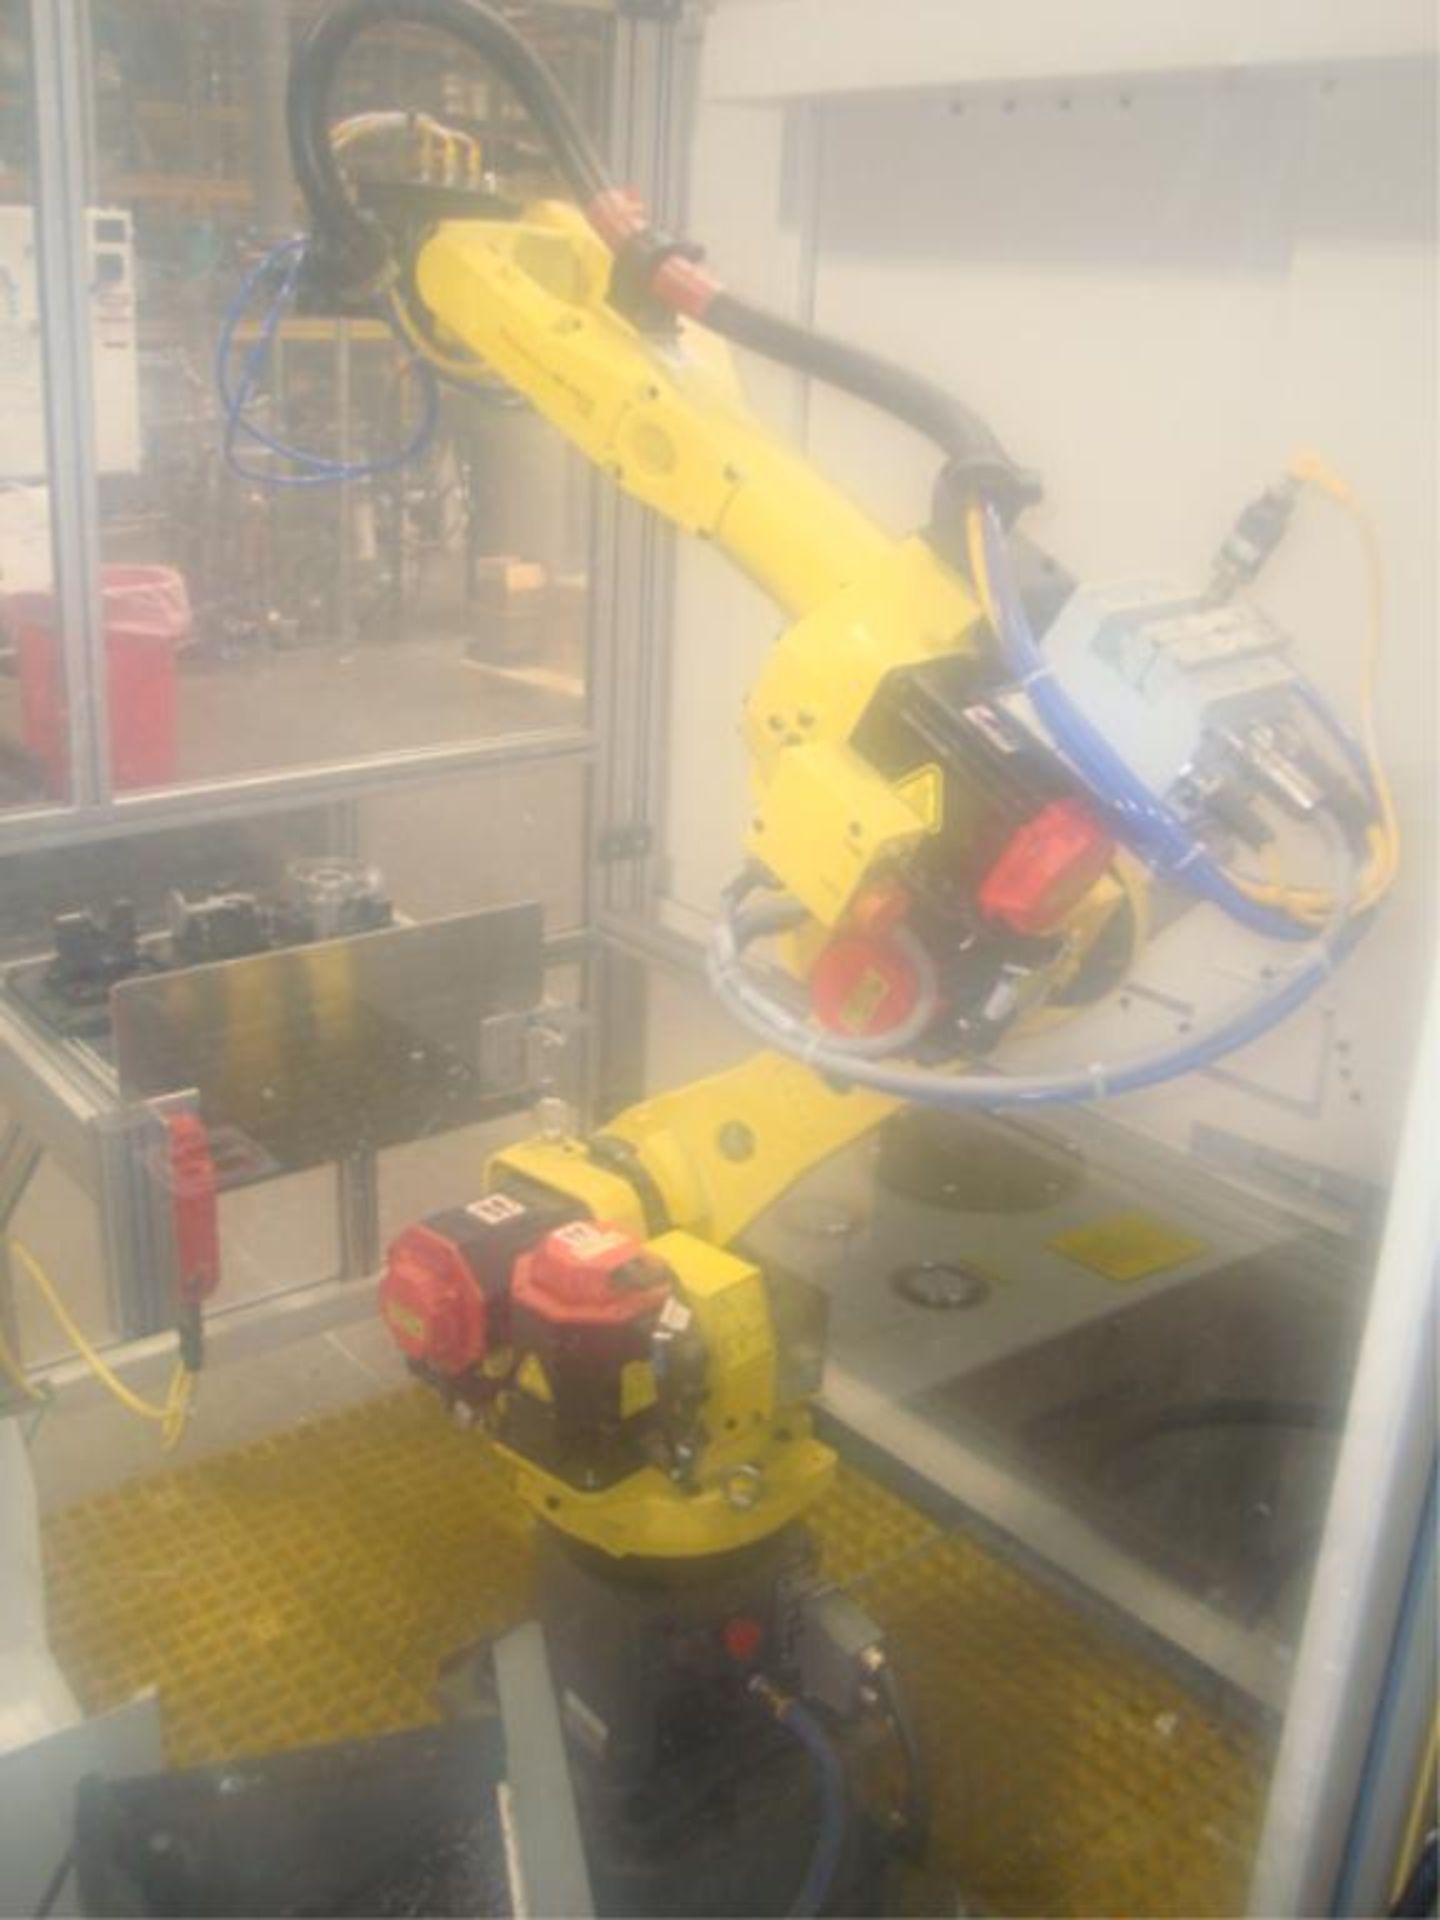 Fanuc Robodrill Alpha-D21MiA5 with Fanuc M-10iA 6-Axis Robot - Image 11 of 60